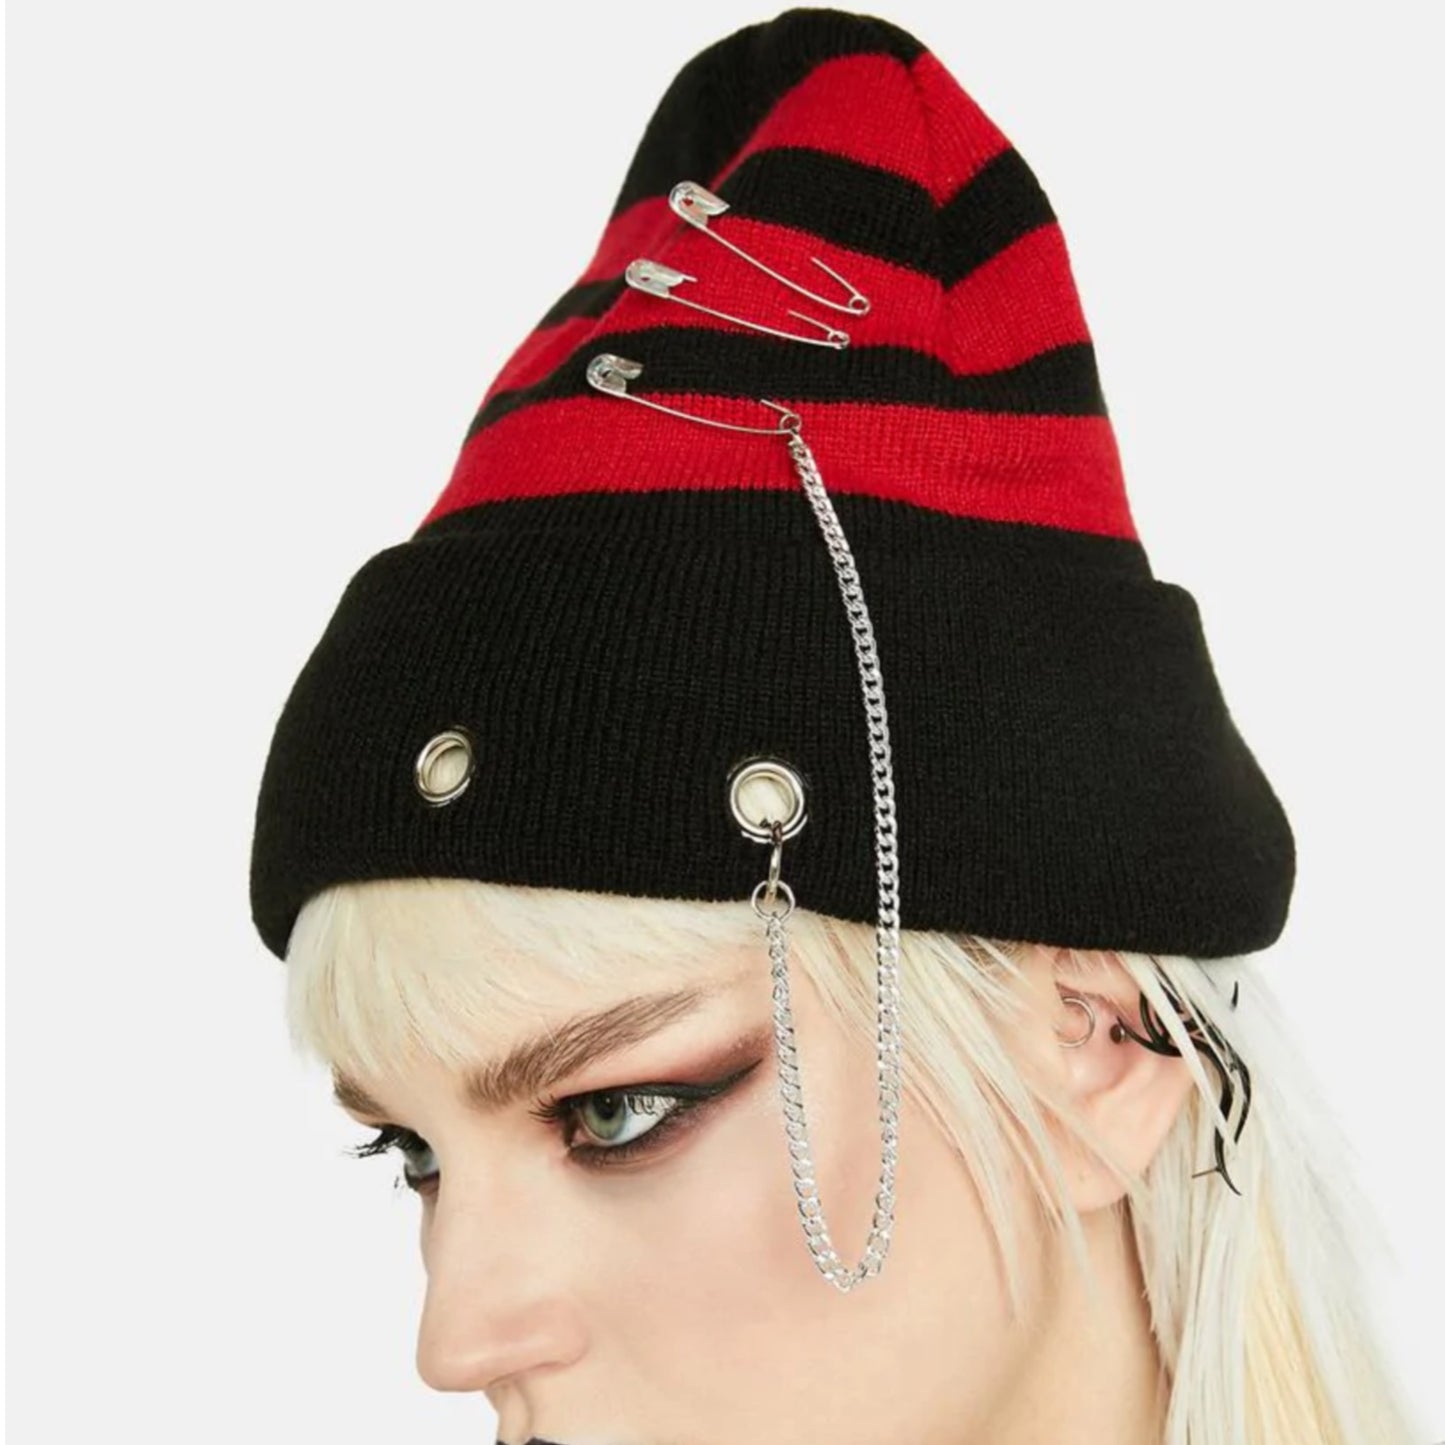 Punk Style Beanie | Black With Red Stripes Safety Pins & A Chain - Dolls Kill - Beanies